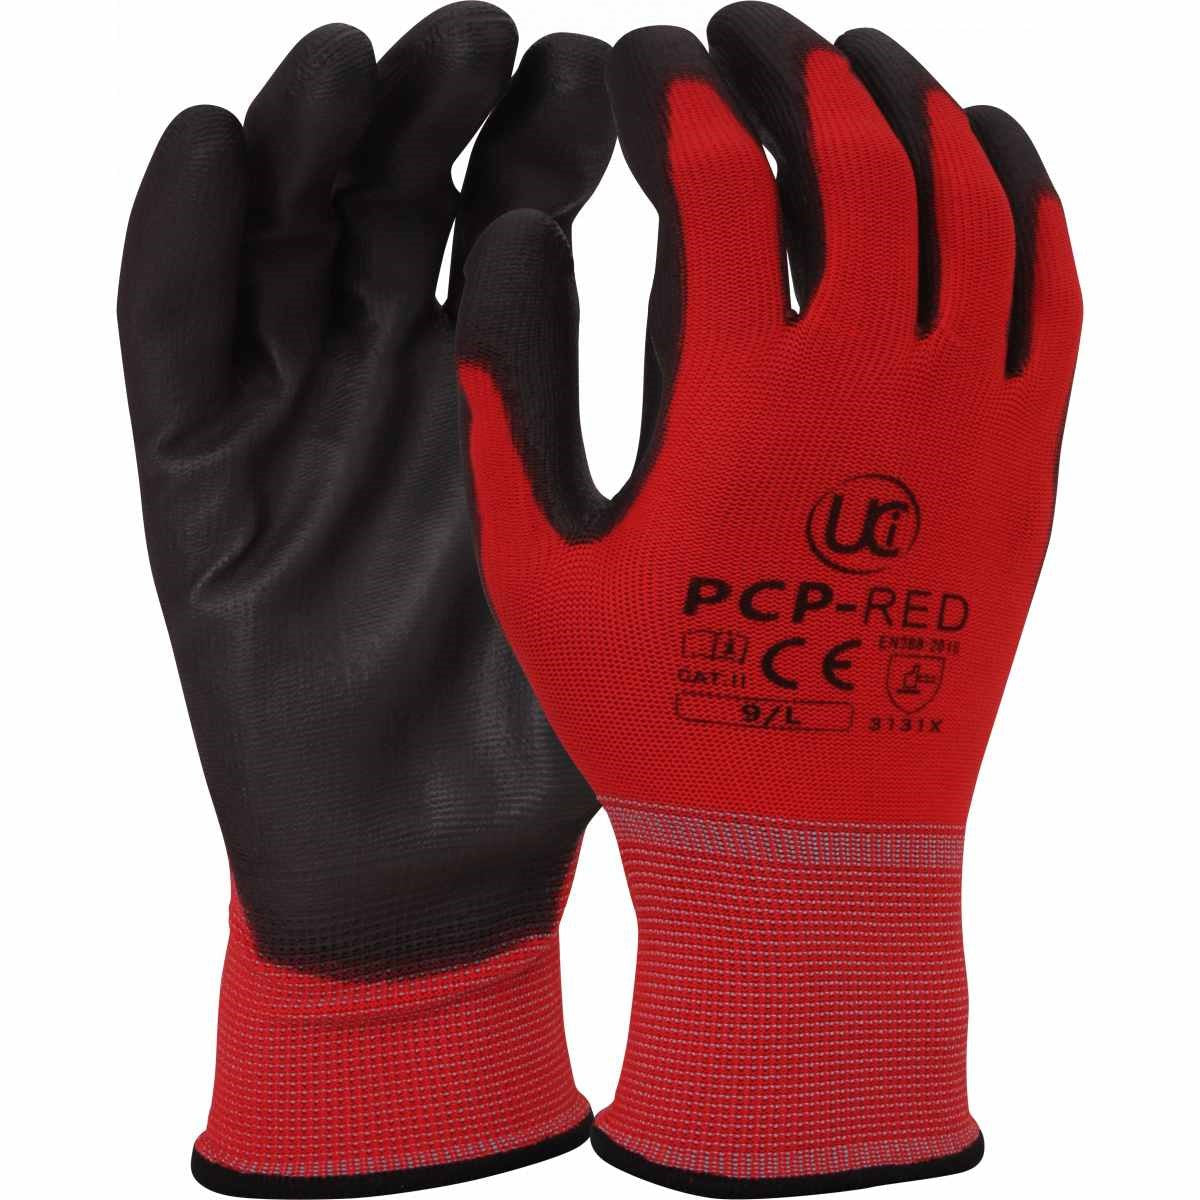 Ultimate Industrial PCP-Red PU Palm Coated Gloves, Black on Red